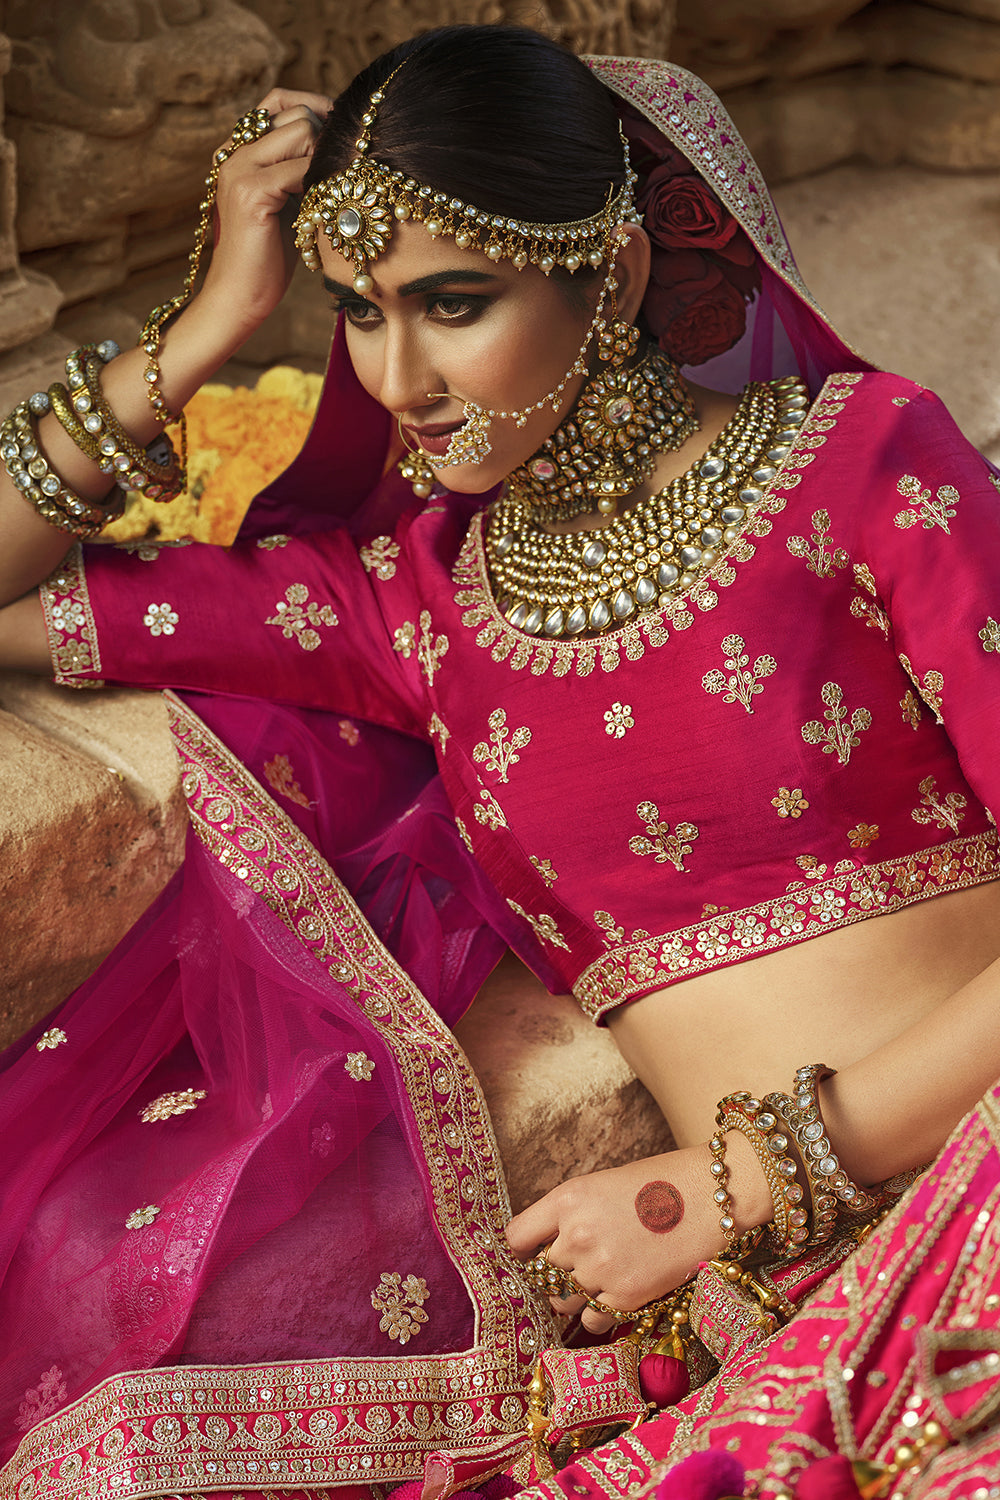 The 8 Gorgeous Temple Jewellery Designs For Brides – Exquisite & Stunning!  - SetMyWed